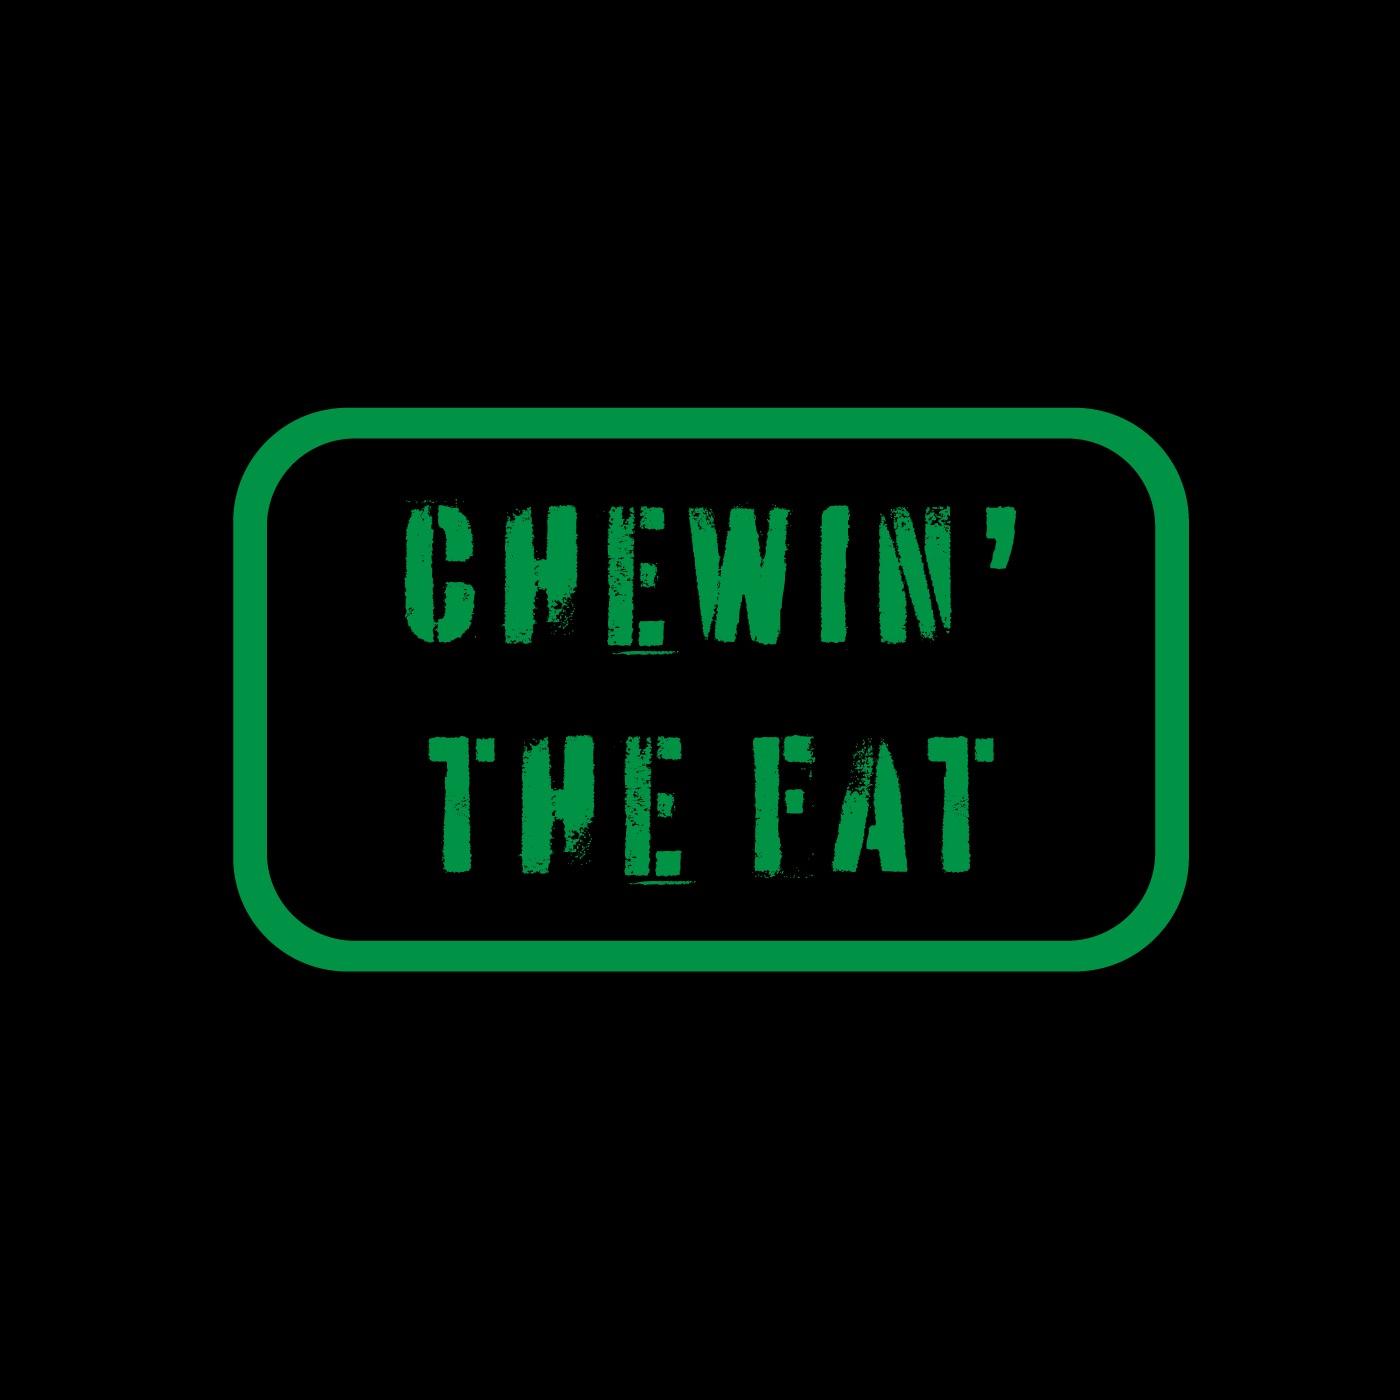 Chewin’ the Fat